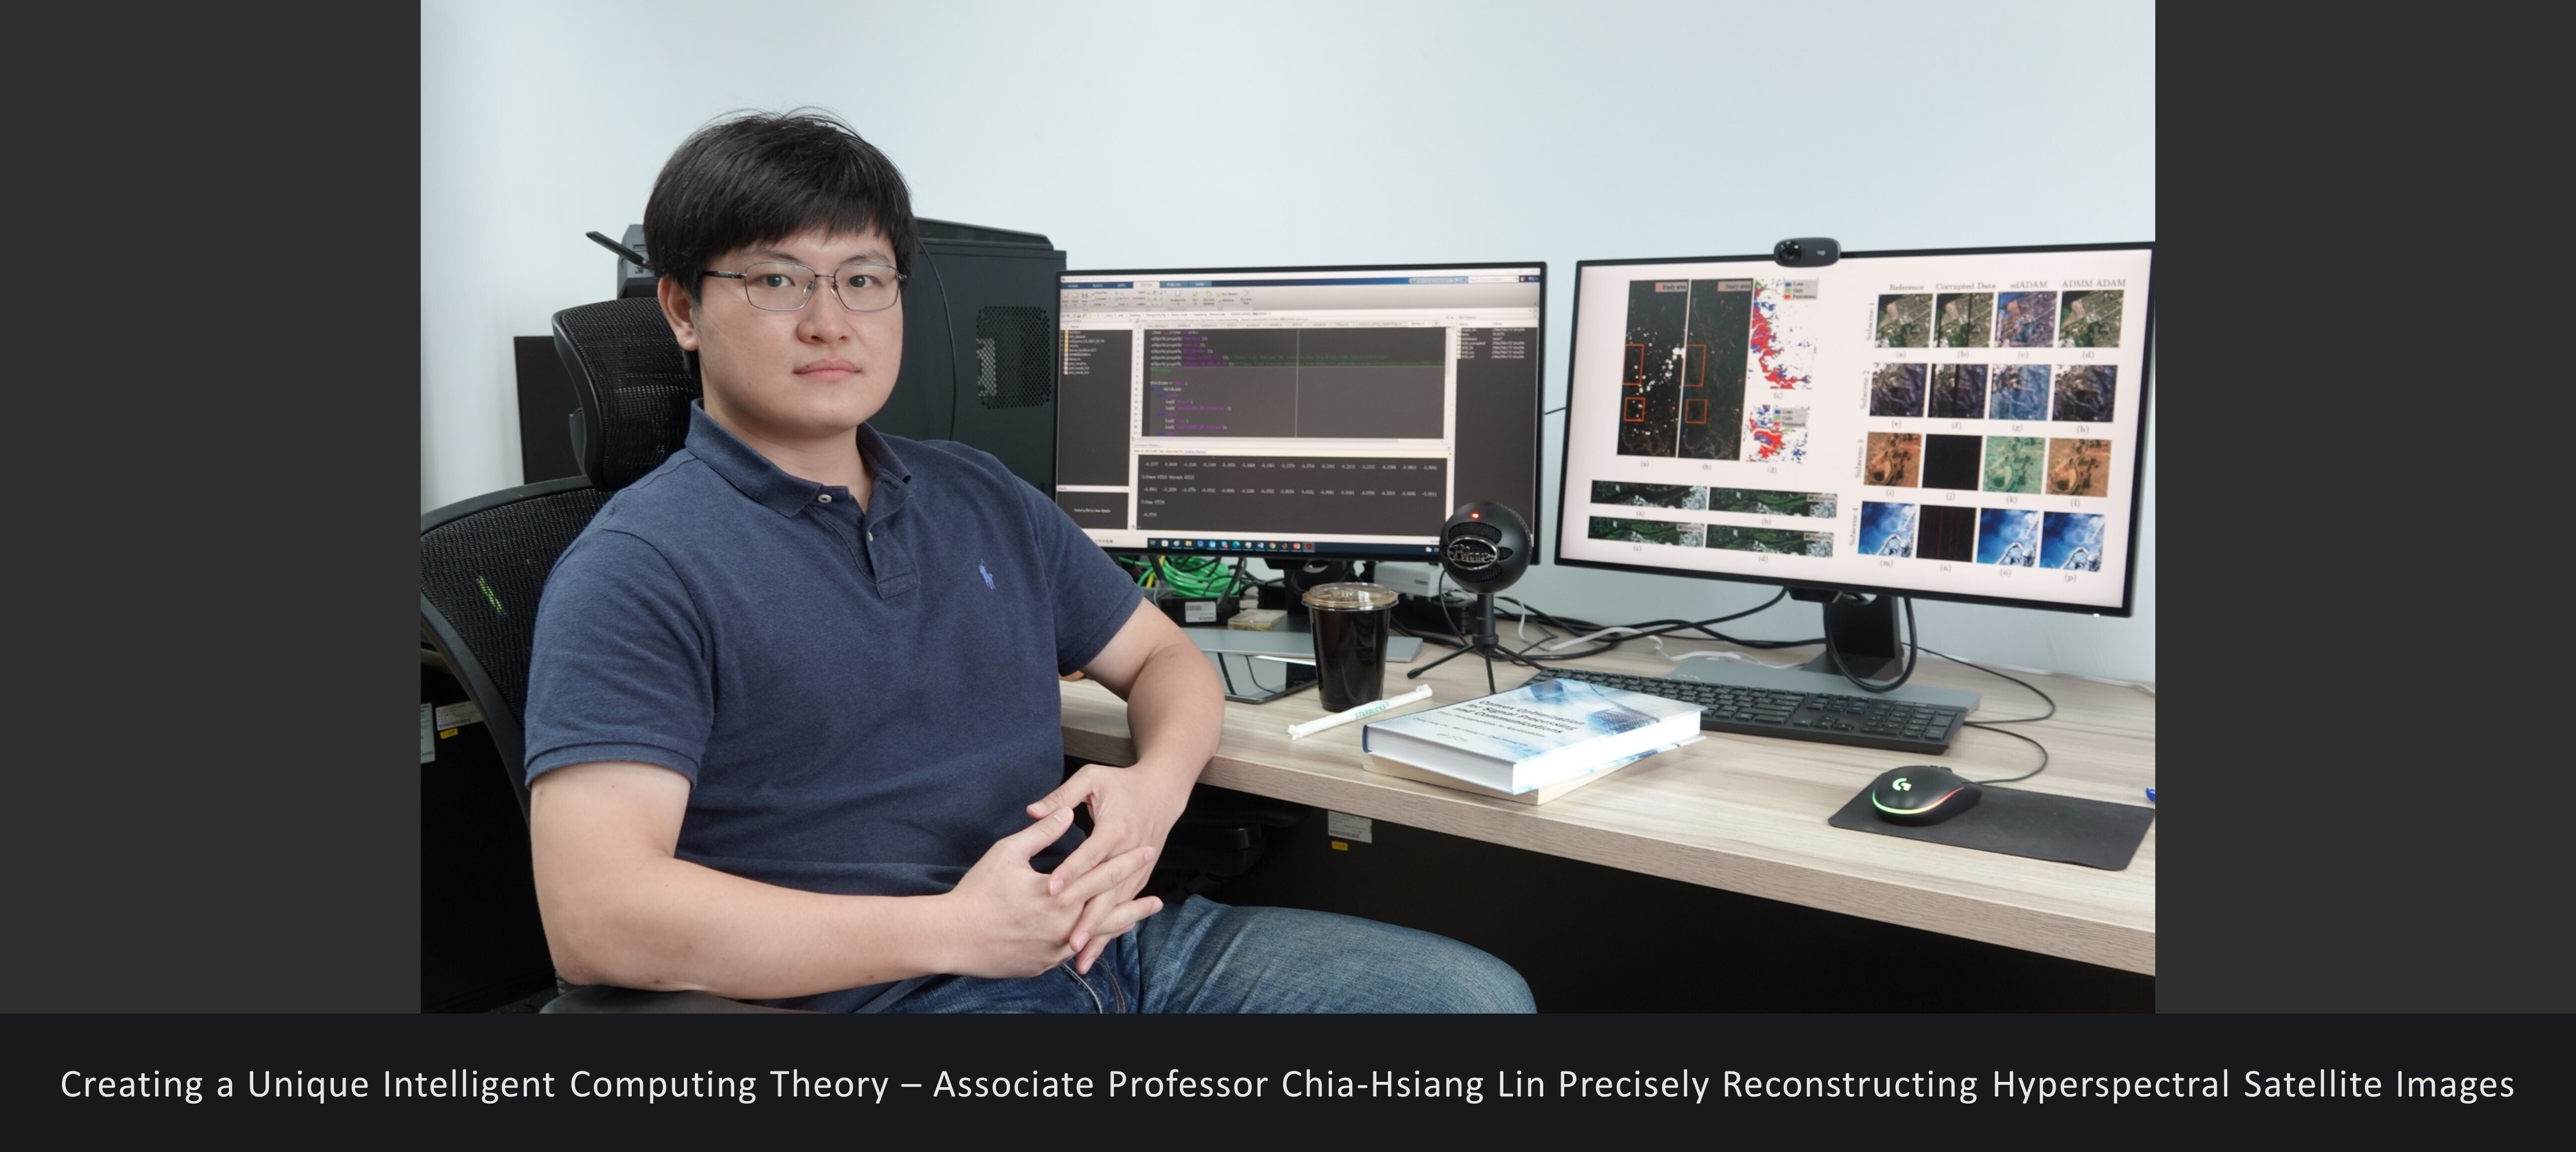 Creating a Unique Intelligent Computing Theory – Associate Professor Chia-Hsiang Lin Precisely Reconstructing Hyperspectral Satellite Images